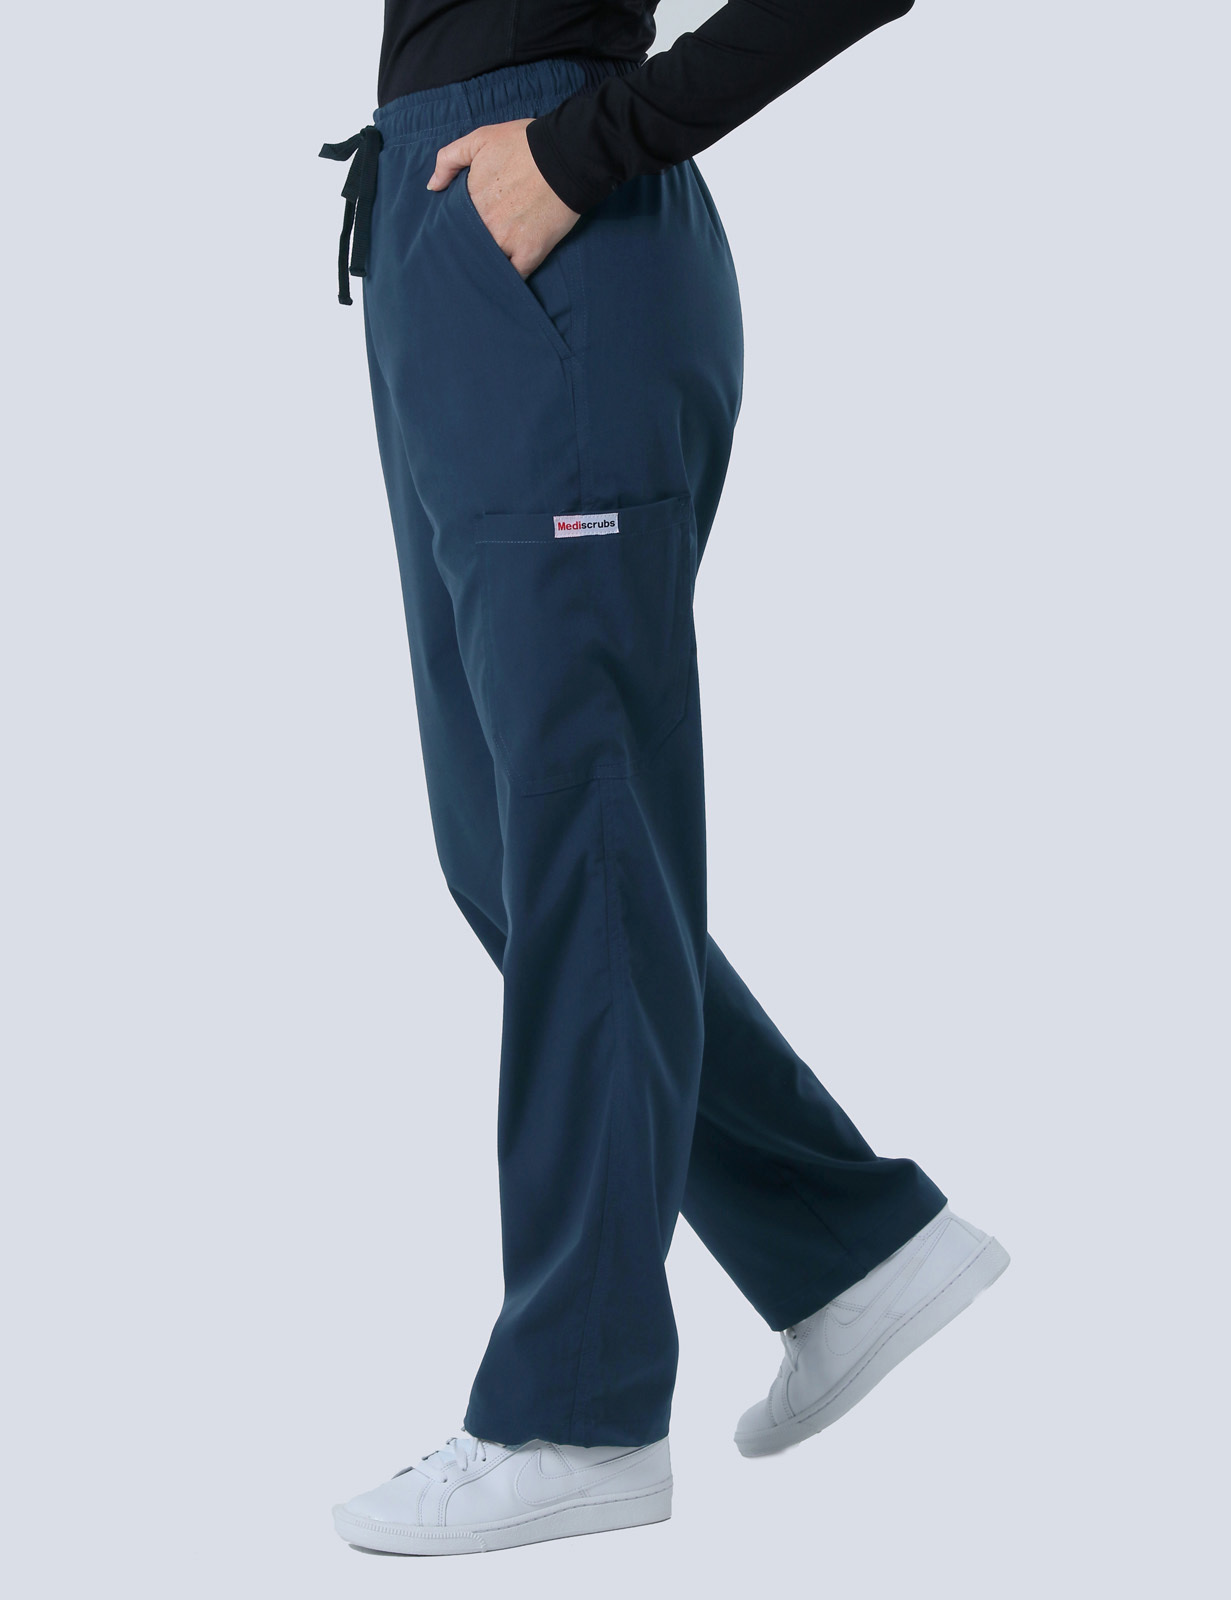 PAH - ACU (Women's Fit Solid Scrub Top and Cargo Pants in Navy incl Logos)